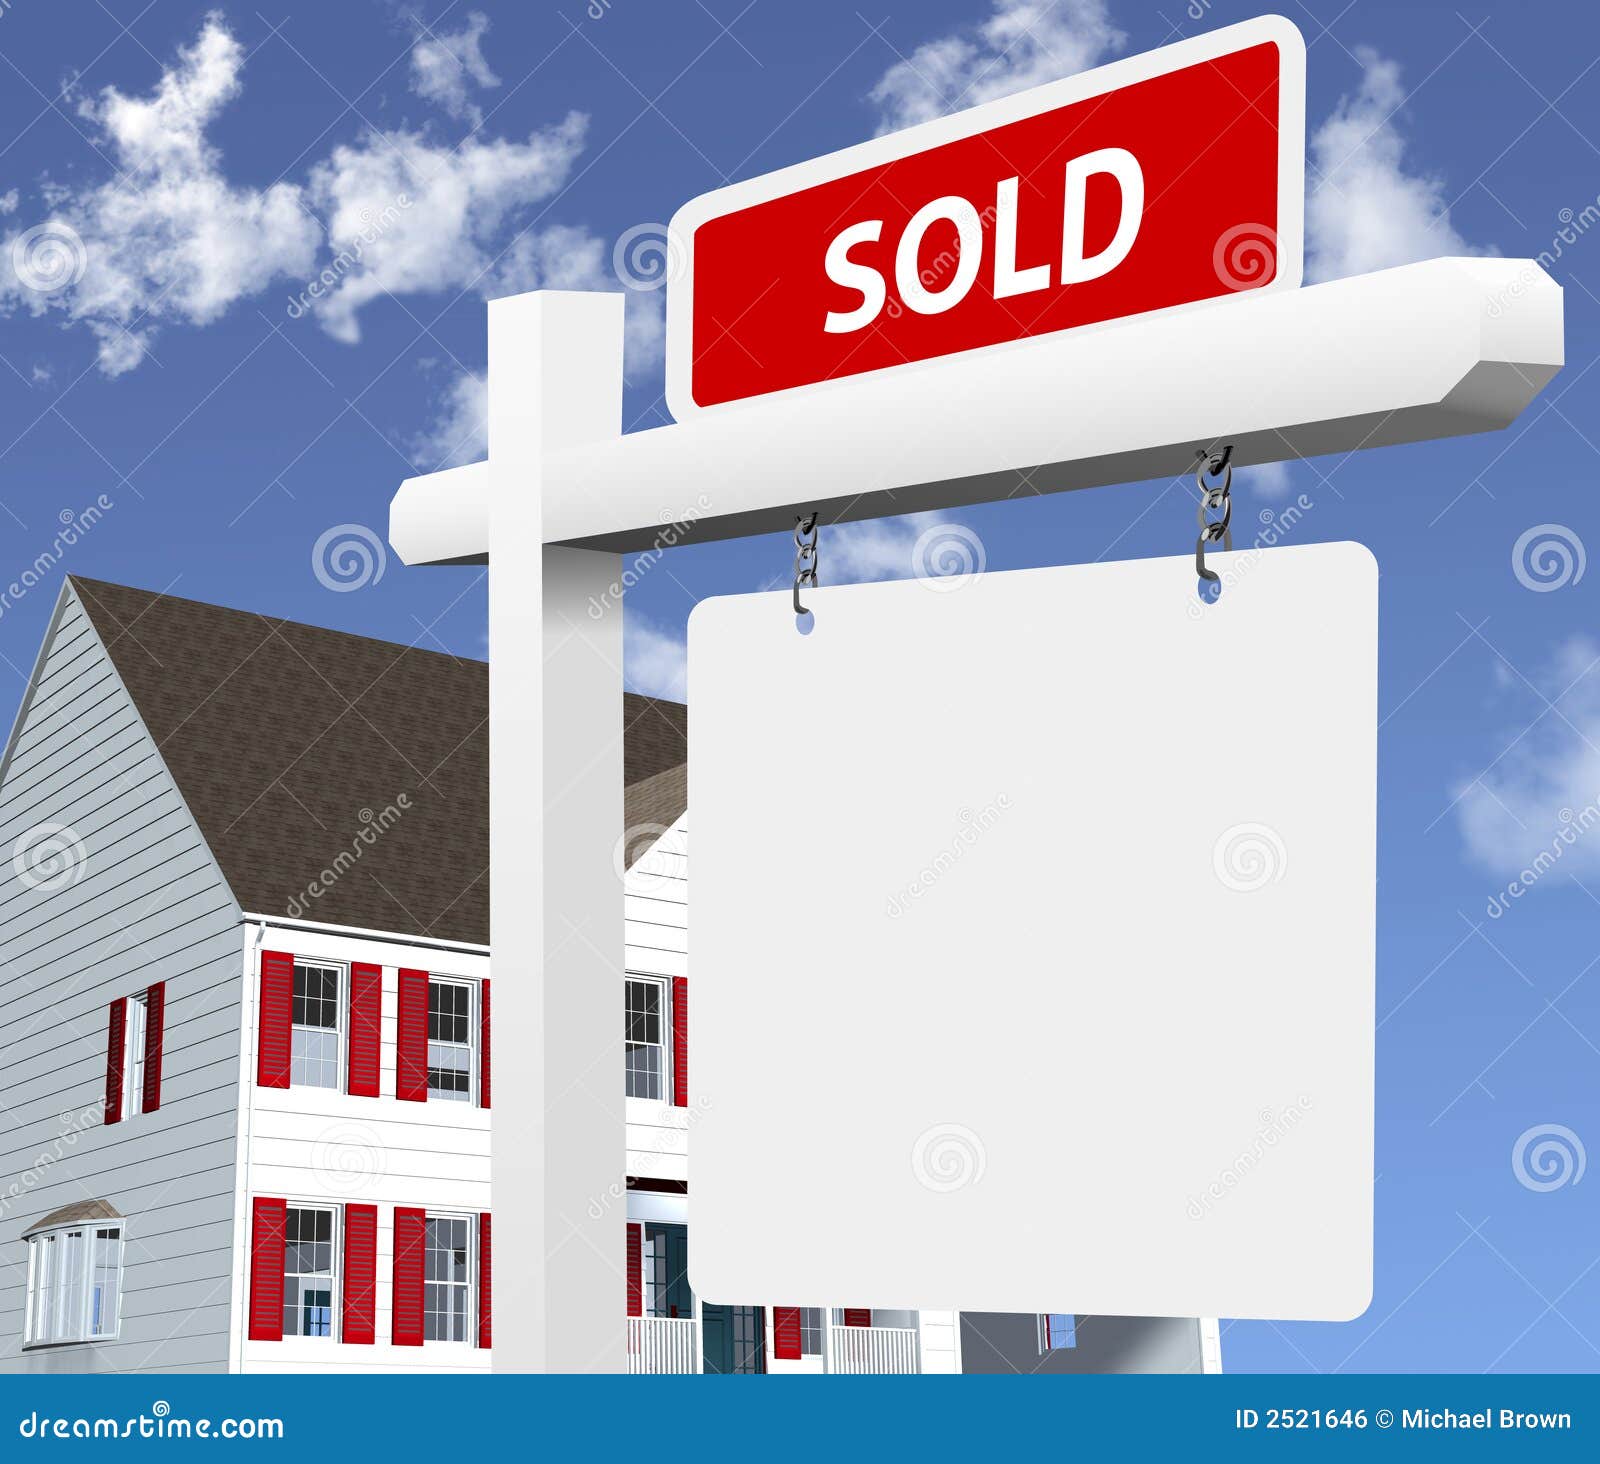 Sharp, bright illustration of a SOLD real estate sign in front of a 